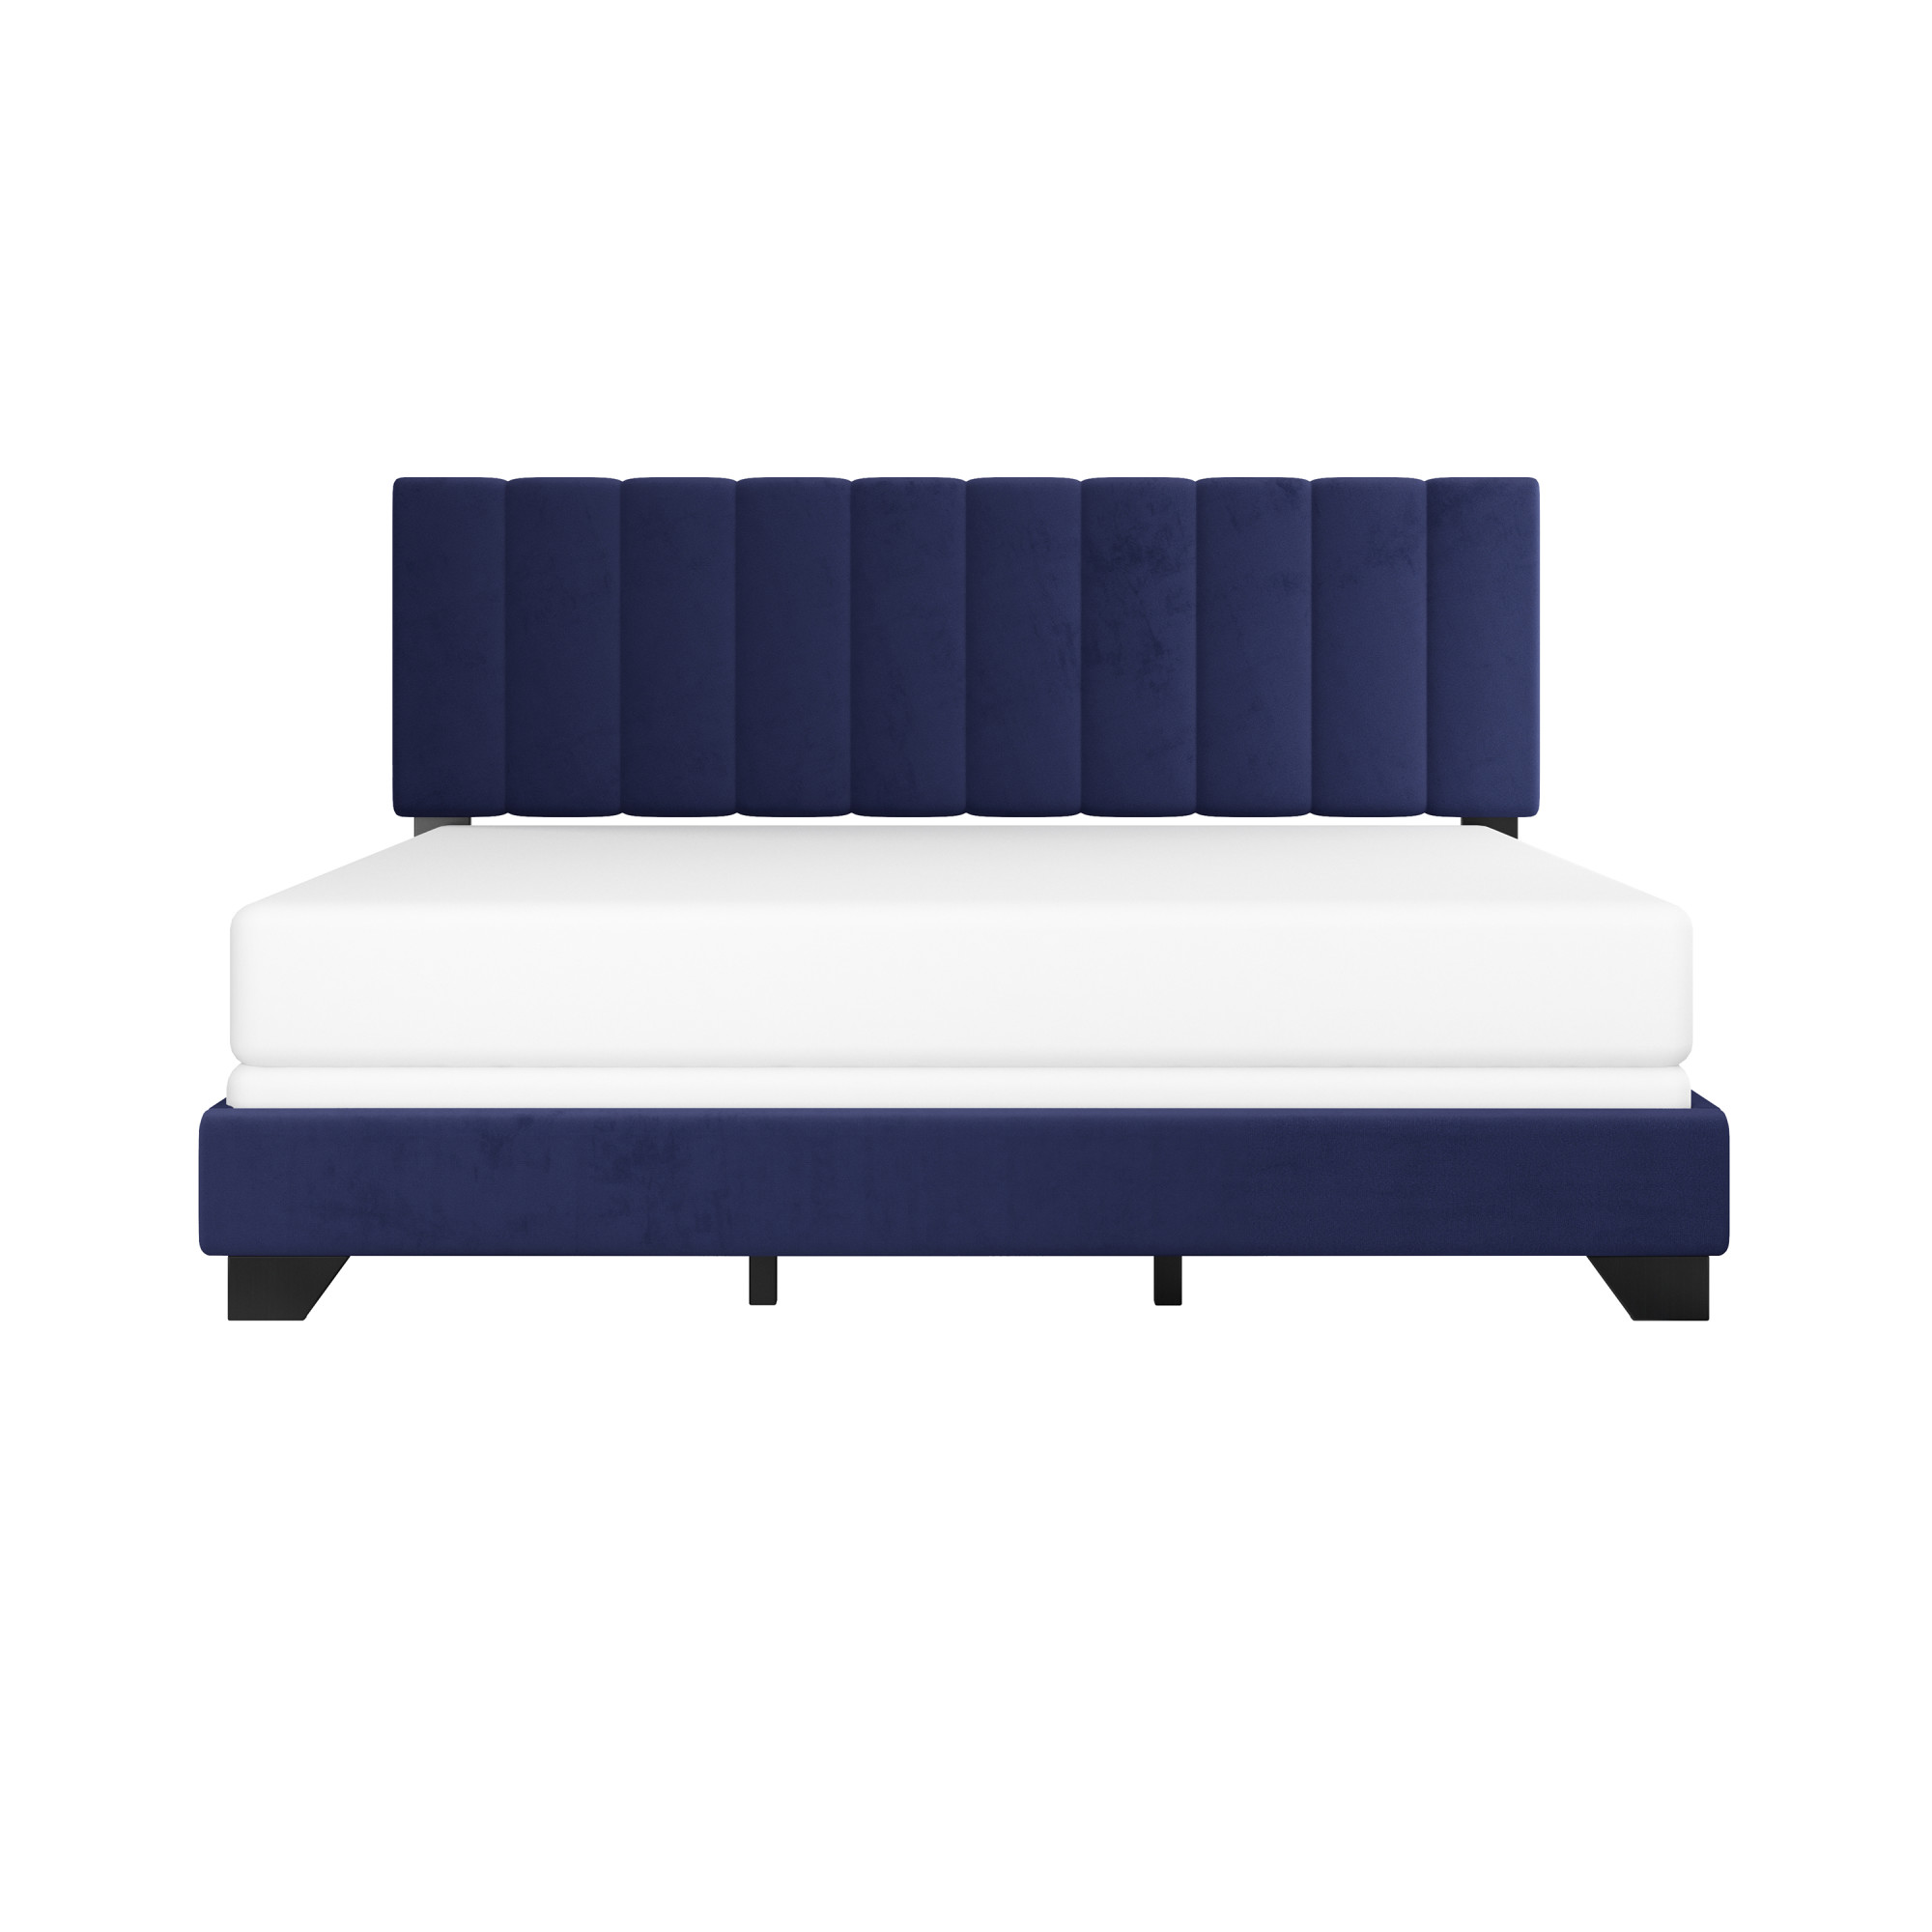 Reece Channel Stitched Upholstered King Bed, Sapphire, by Hillsdale Living Essentials - image 2 of 17